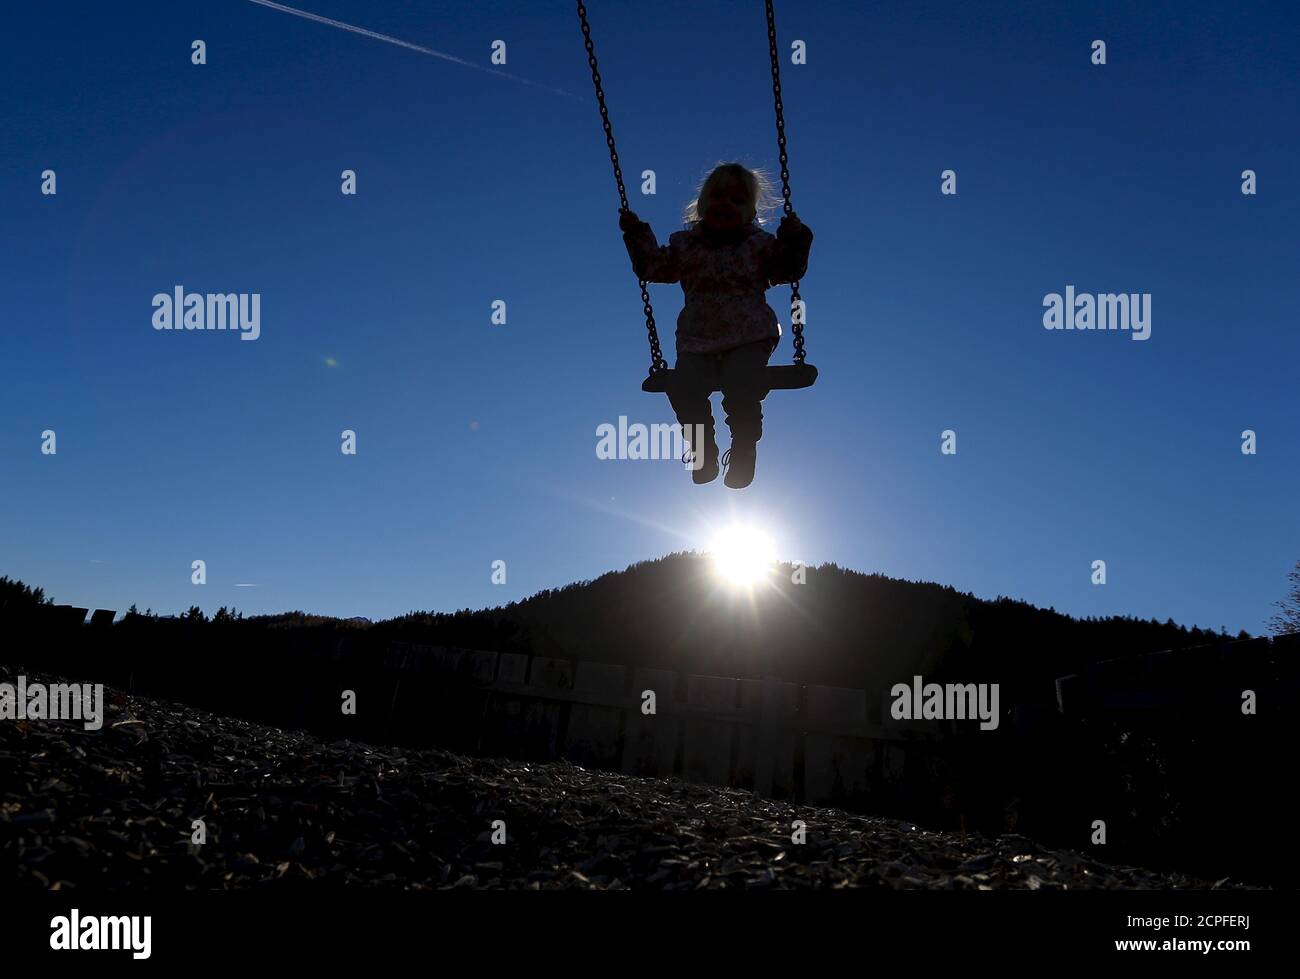 Page 3 - Girl Swing Silhouette High Resolution Stock Photography and Images  - Alamy